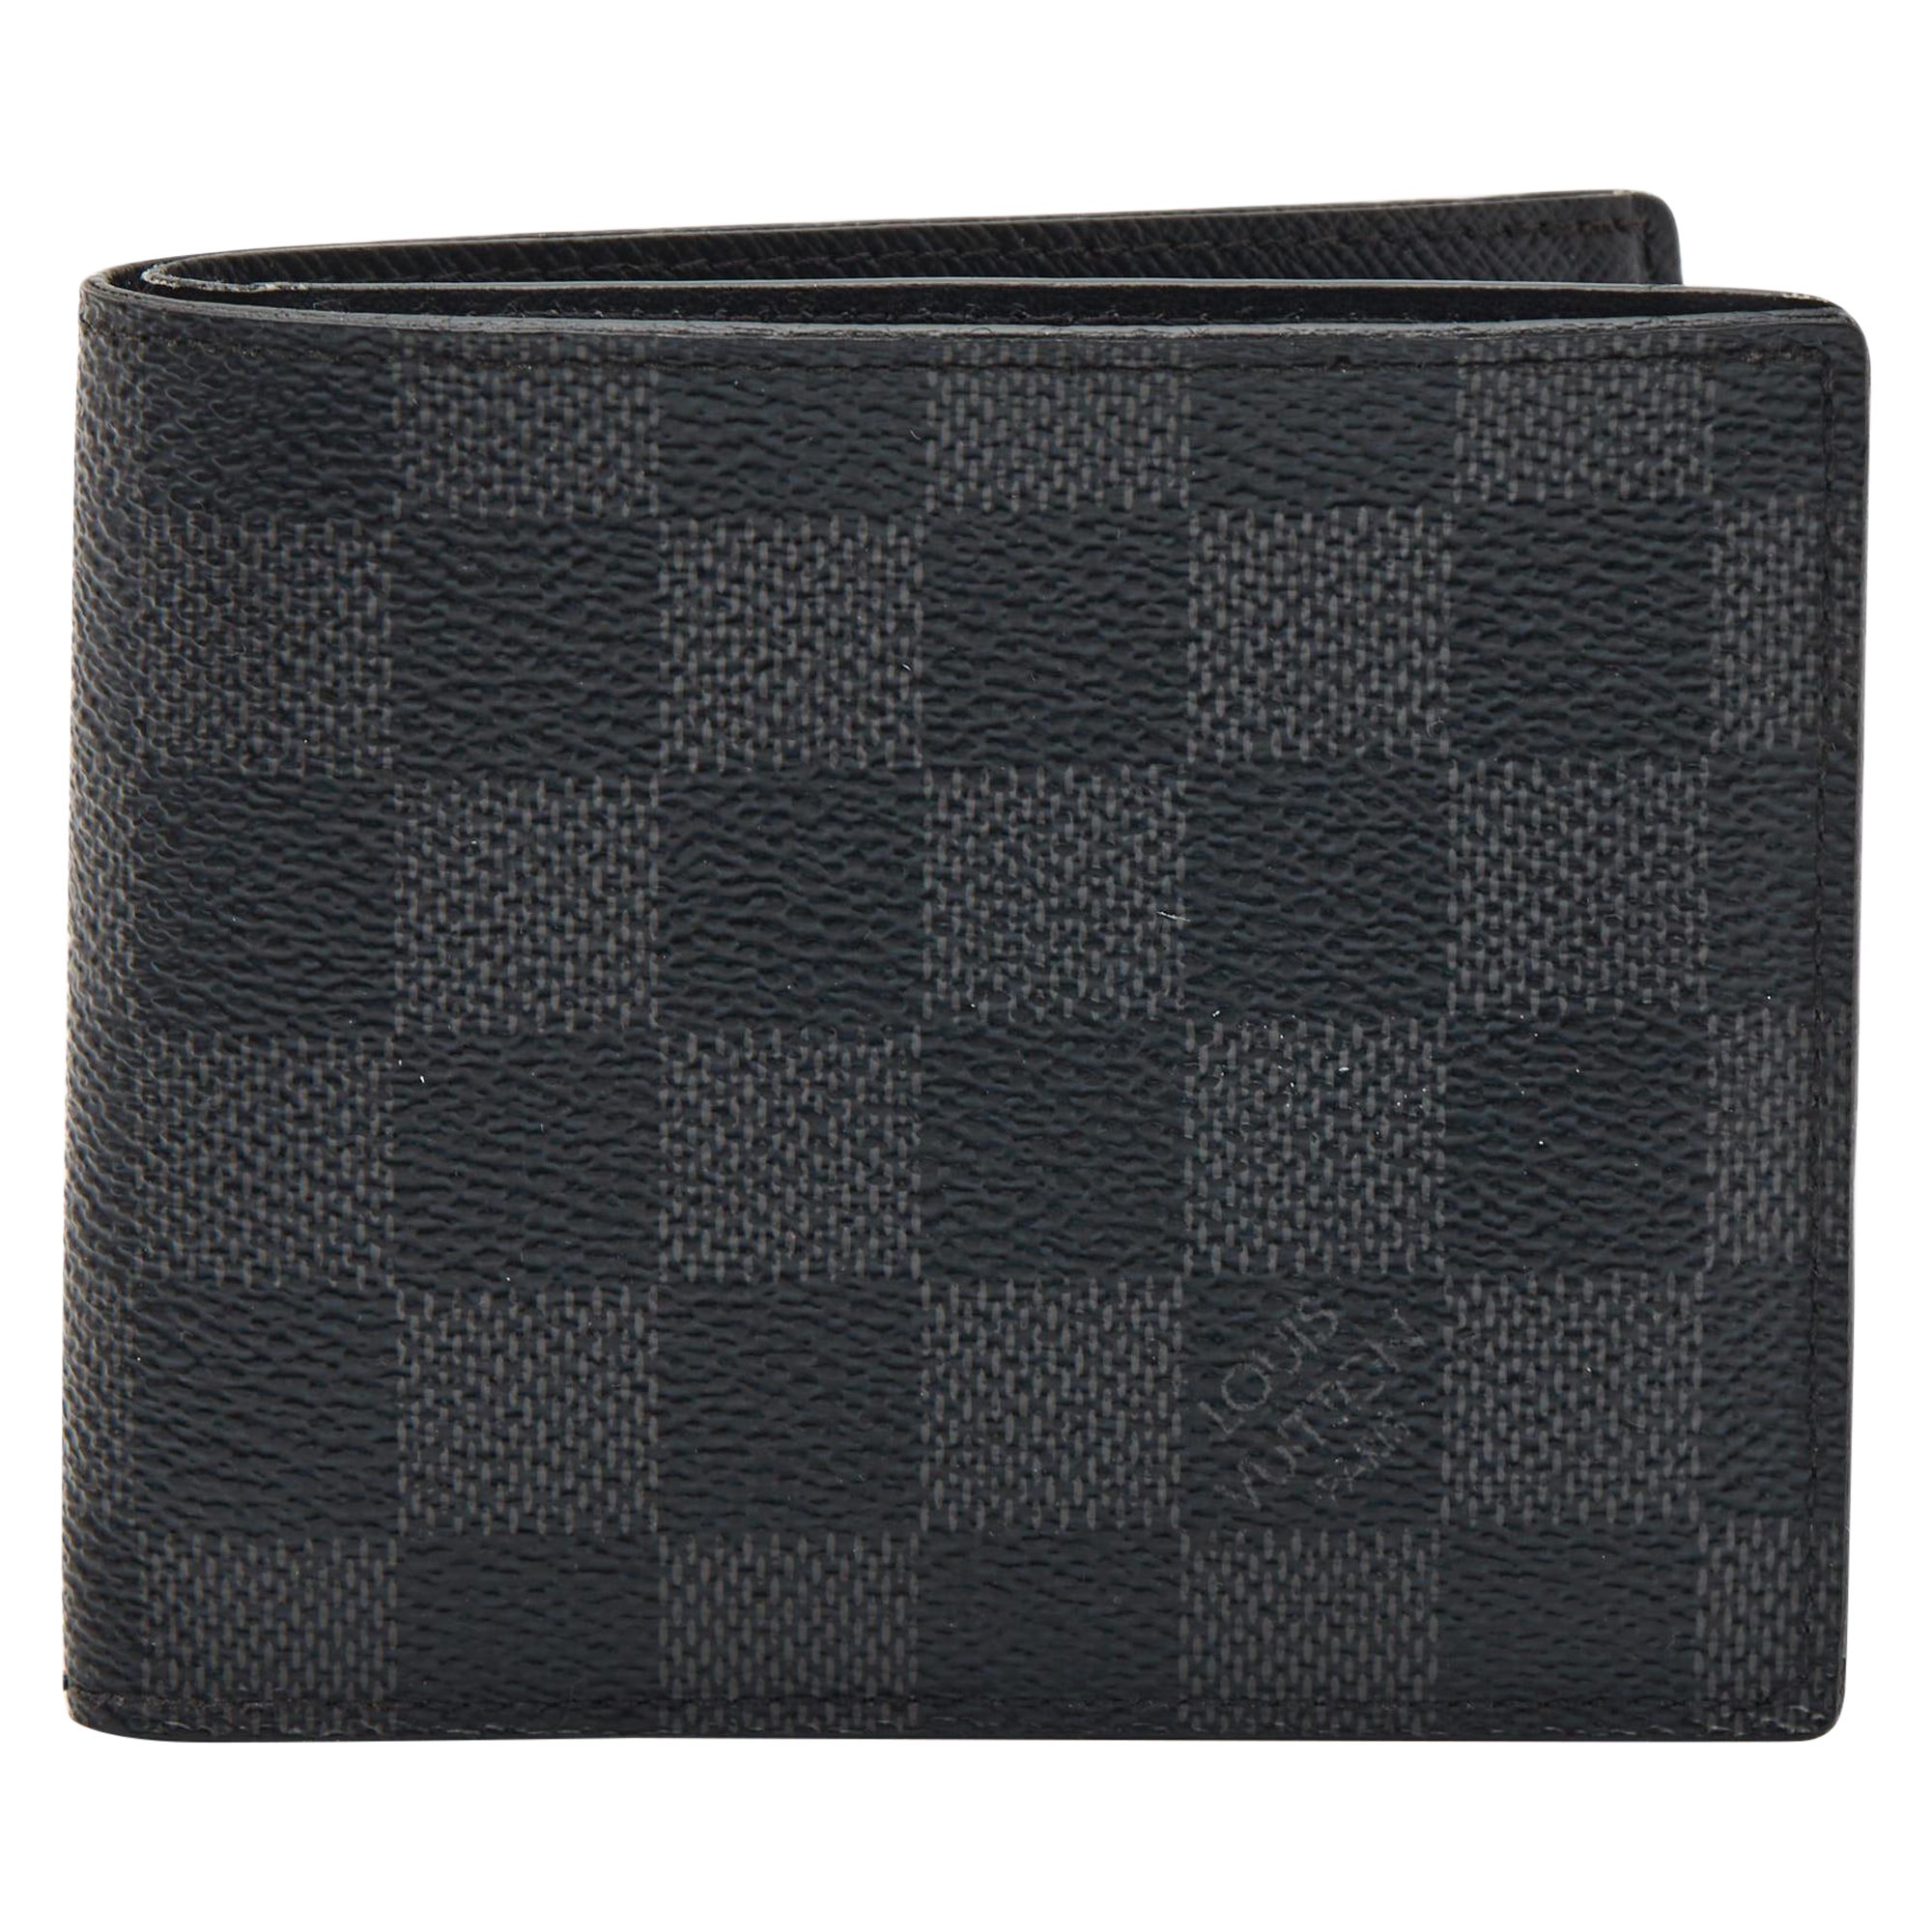 Where is the date code on a Louis Vuitton wallet?